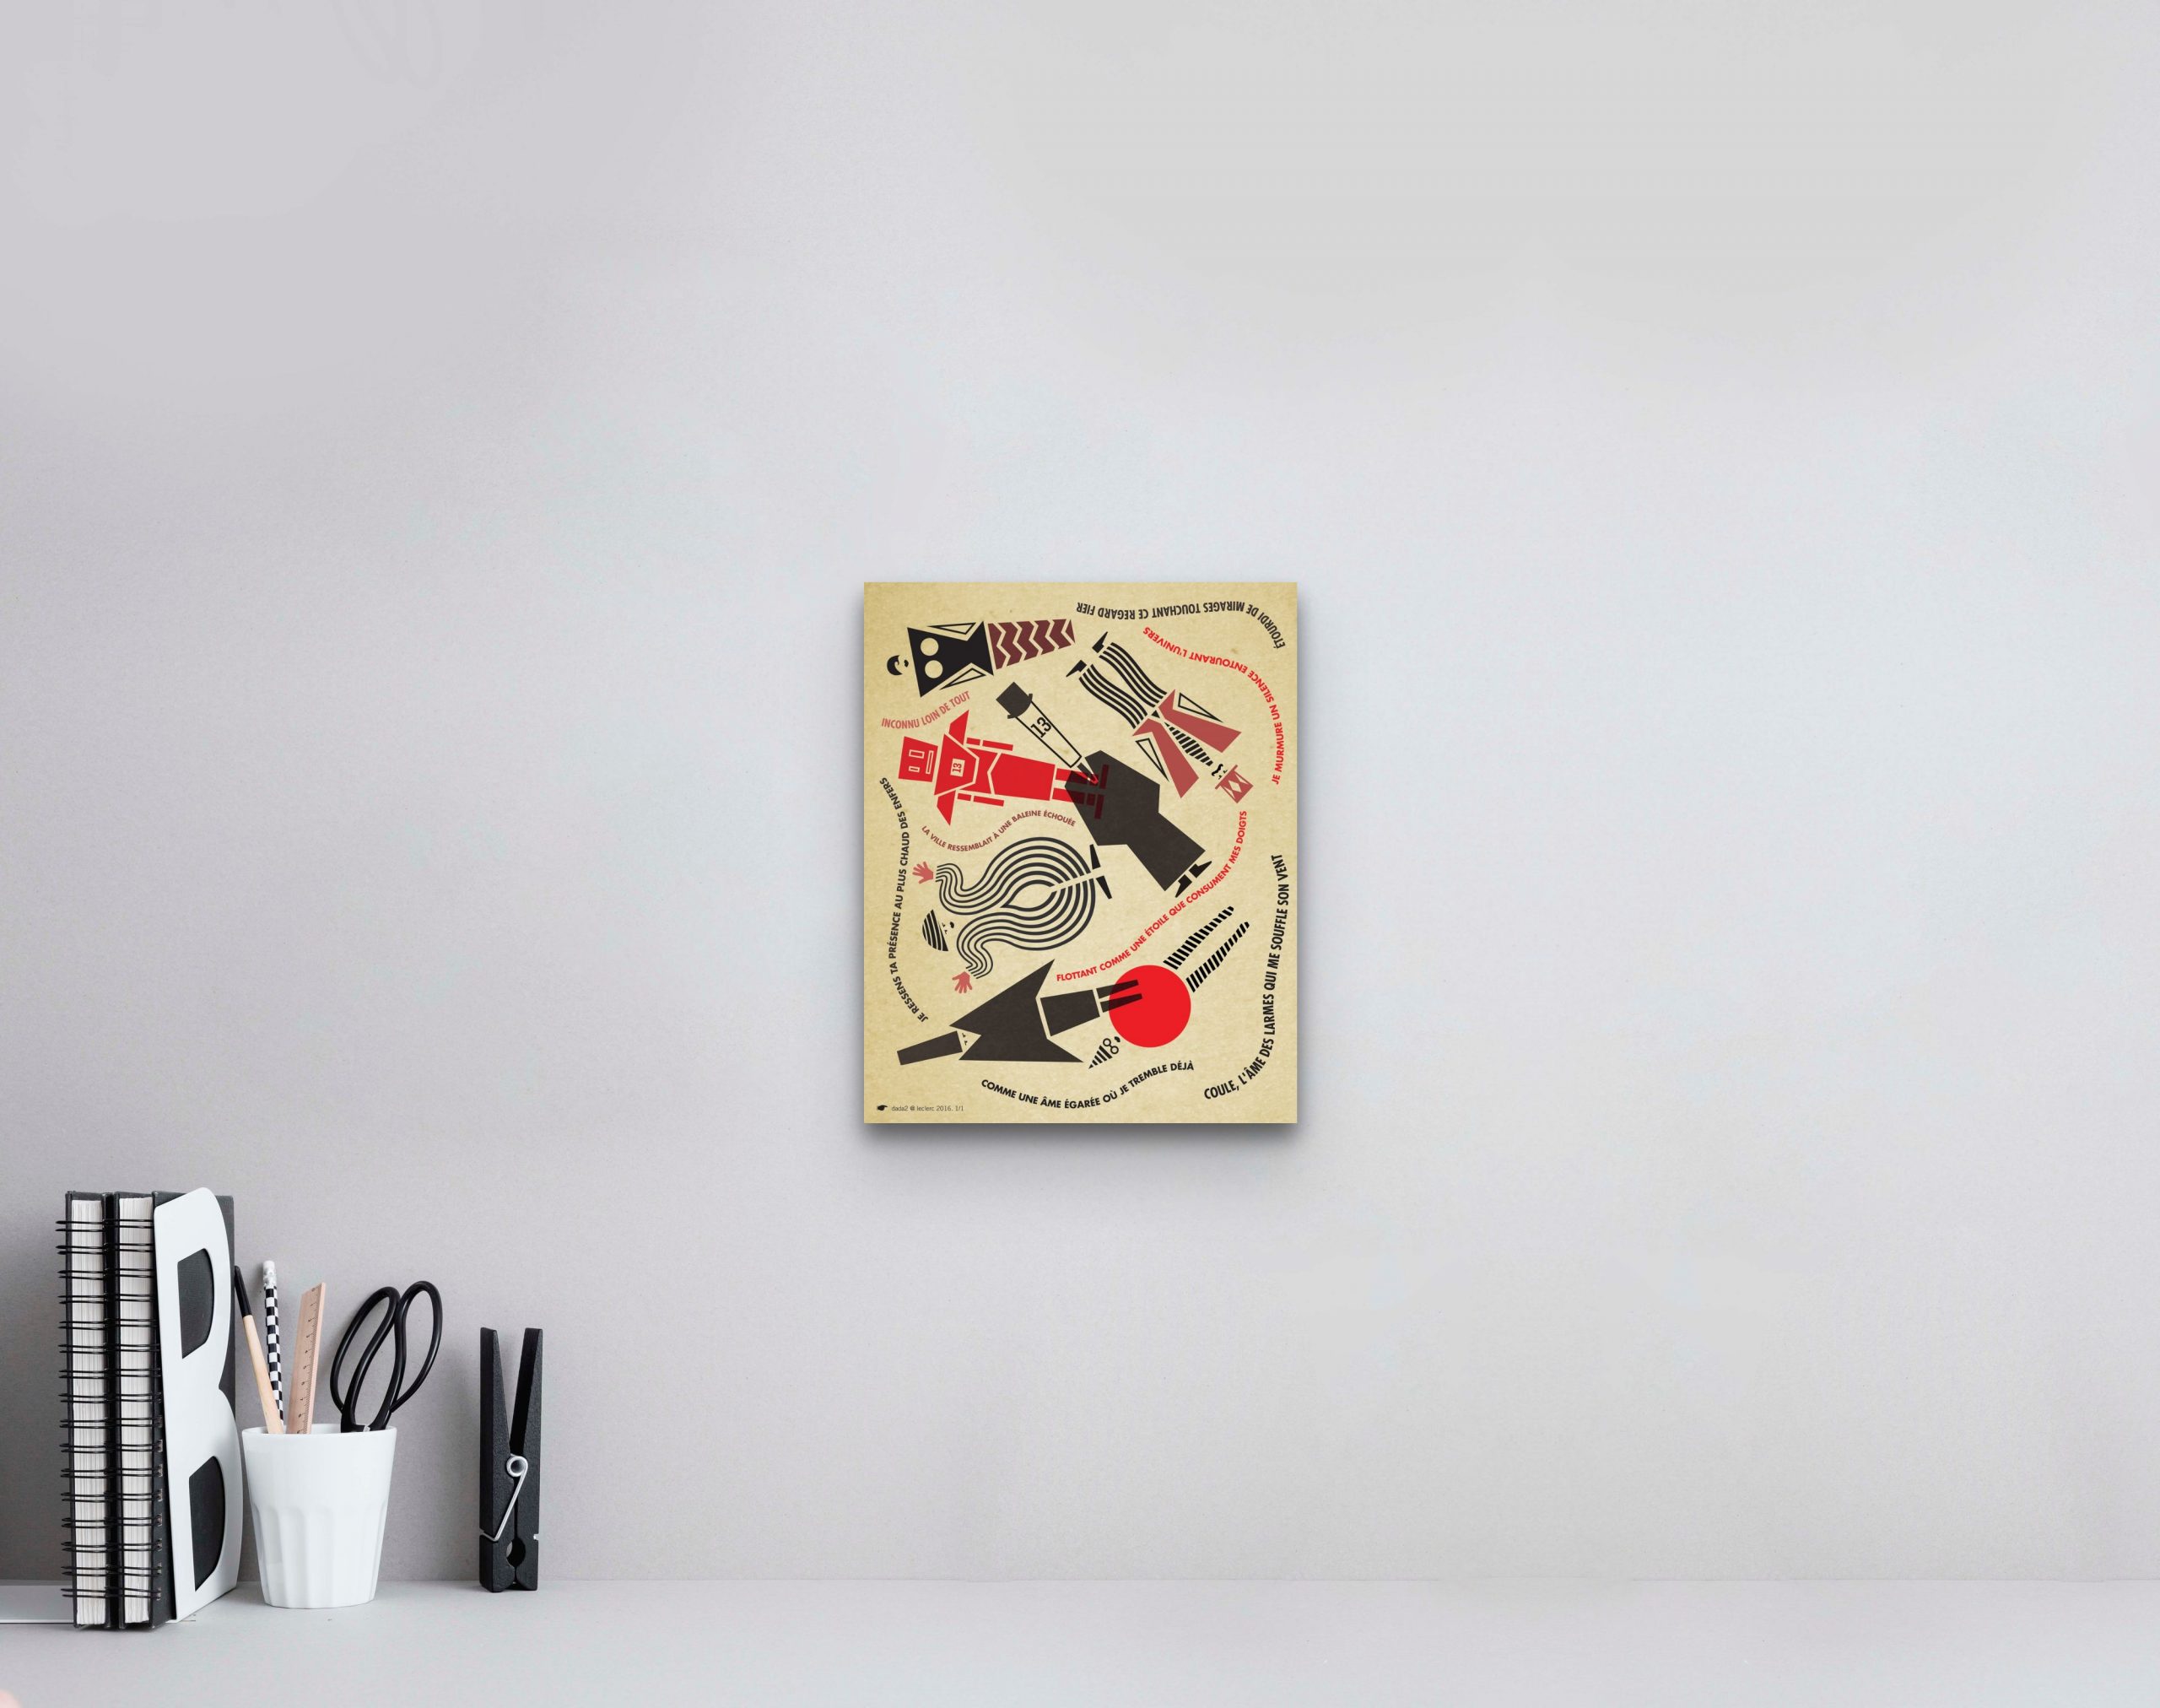 An artwork measuring 10 W x 8 H x 0.1 D inches displayed in a small interior setting. The colourful piece adds a touch of creativity and vibrancy to the interior, enhancing the overall aesthetic appeal.